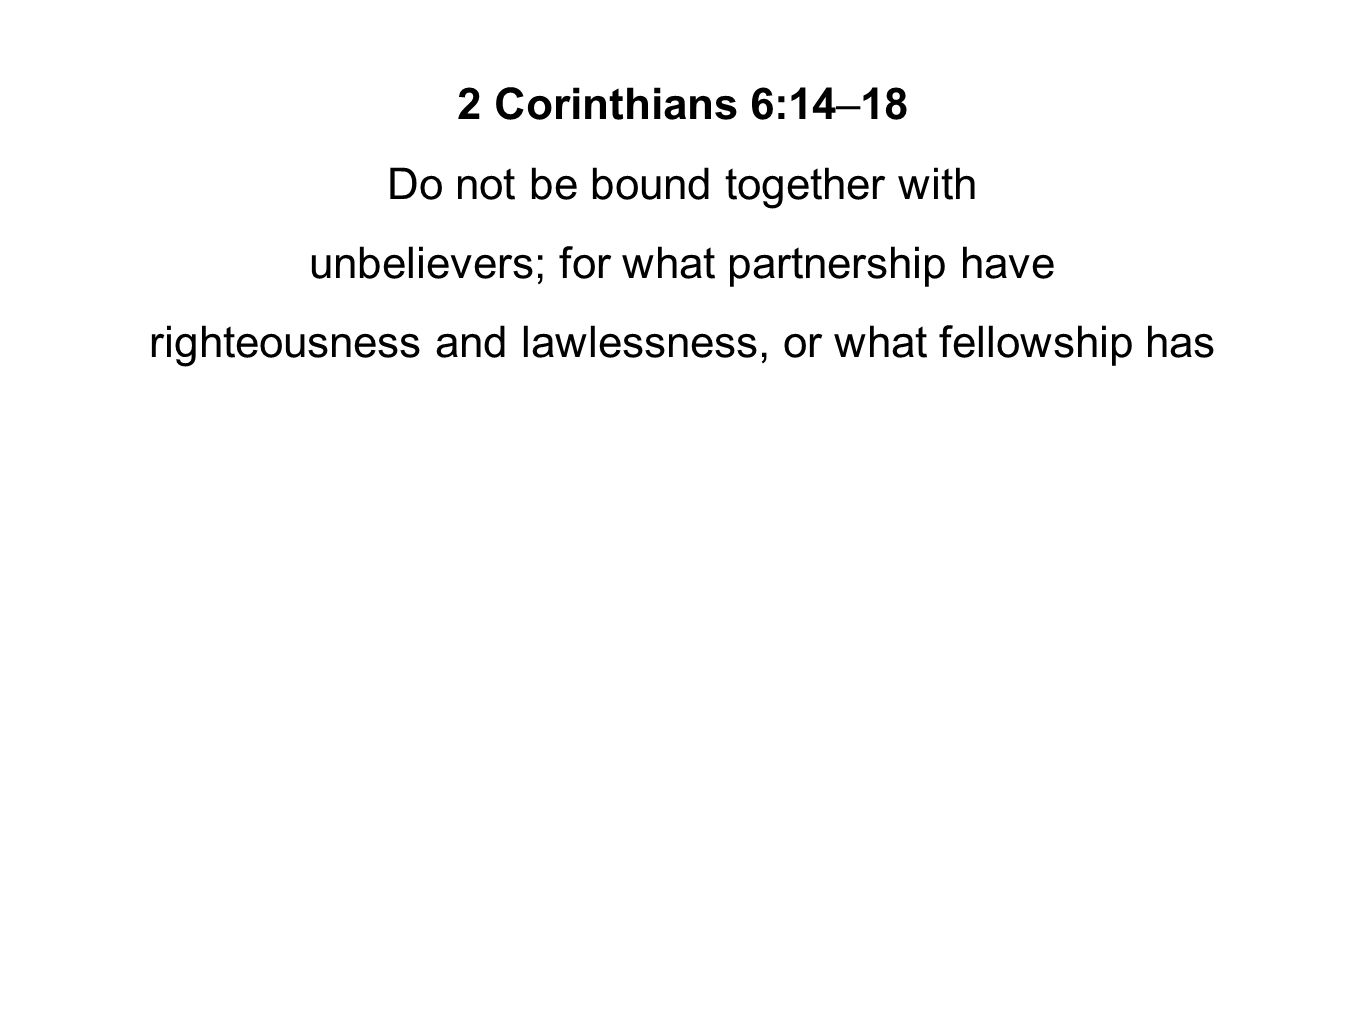 2 Corinthians 6:14–18 Do not be bound together with unbelievers; for what partnership have righteousness and lawlessness, or what fellowship has